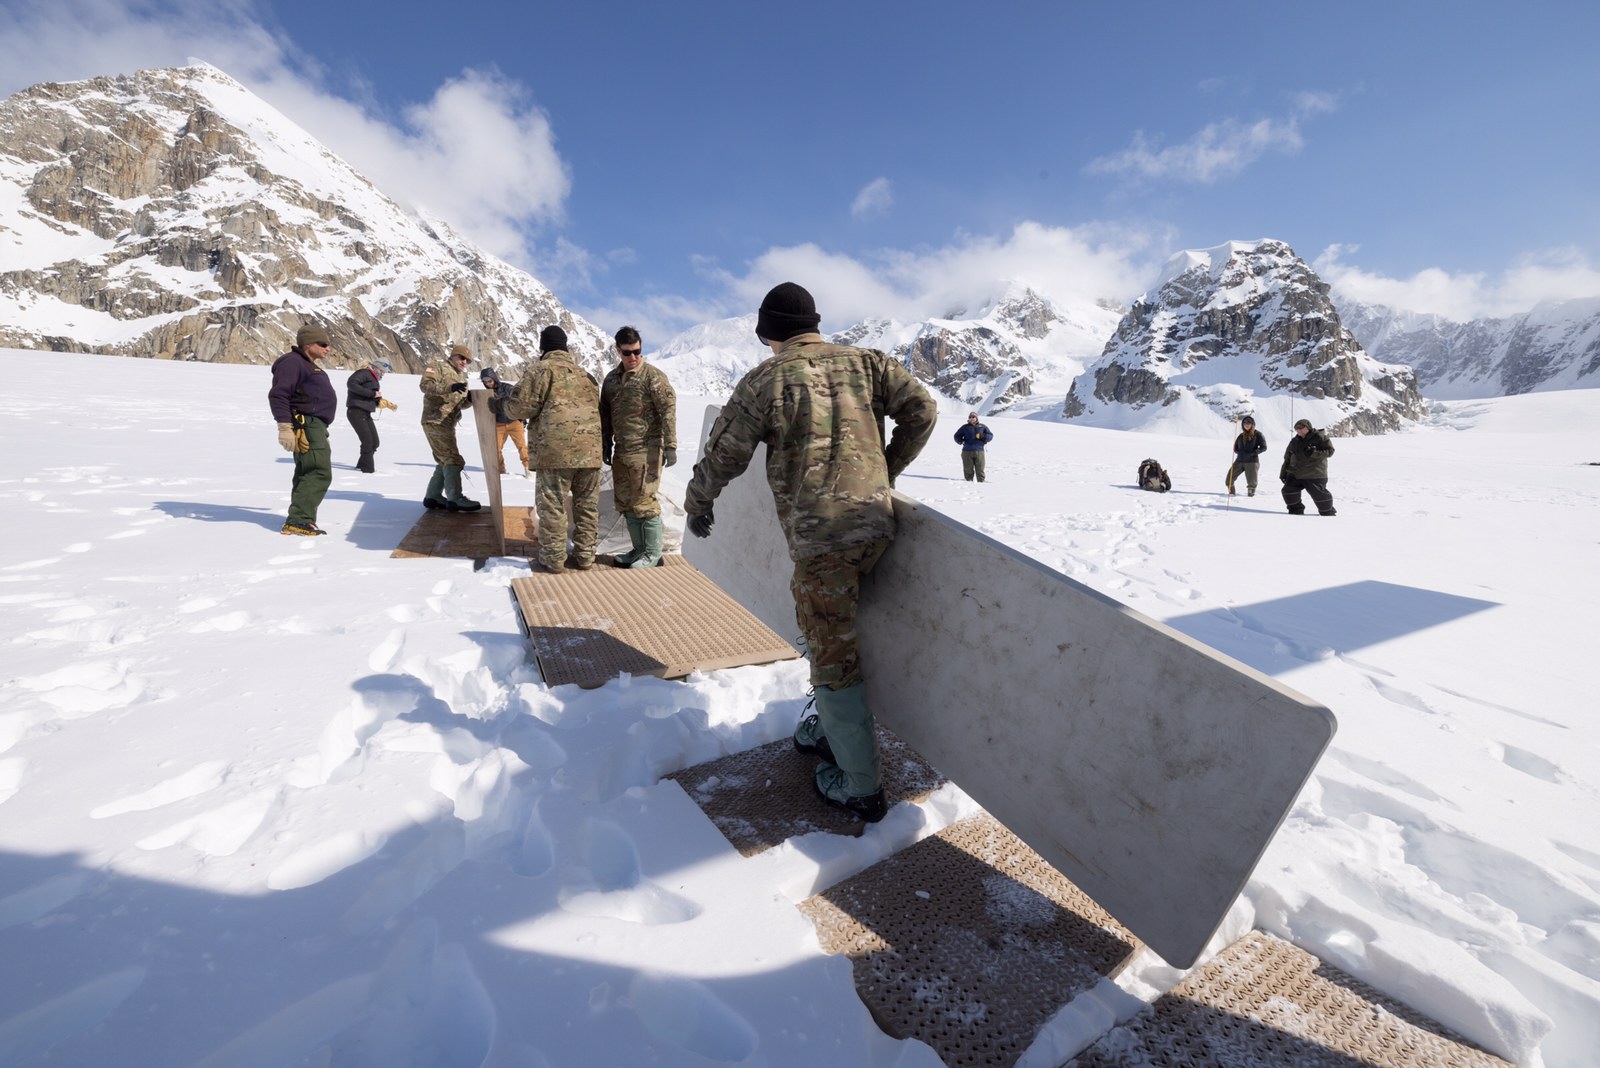 Soldiers in camoflage haul camp gear on a snowy glacier